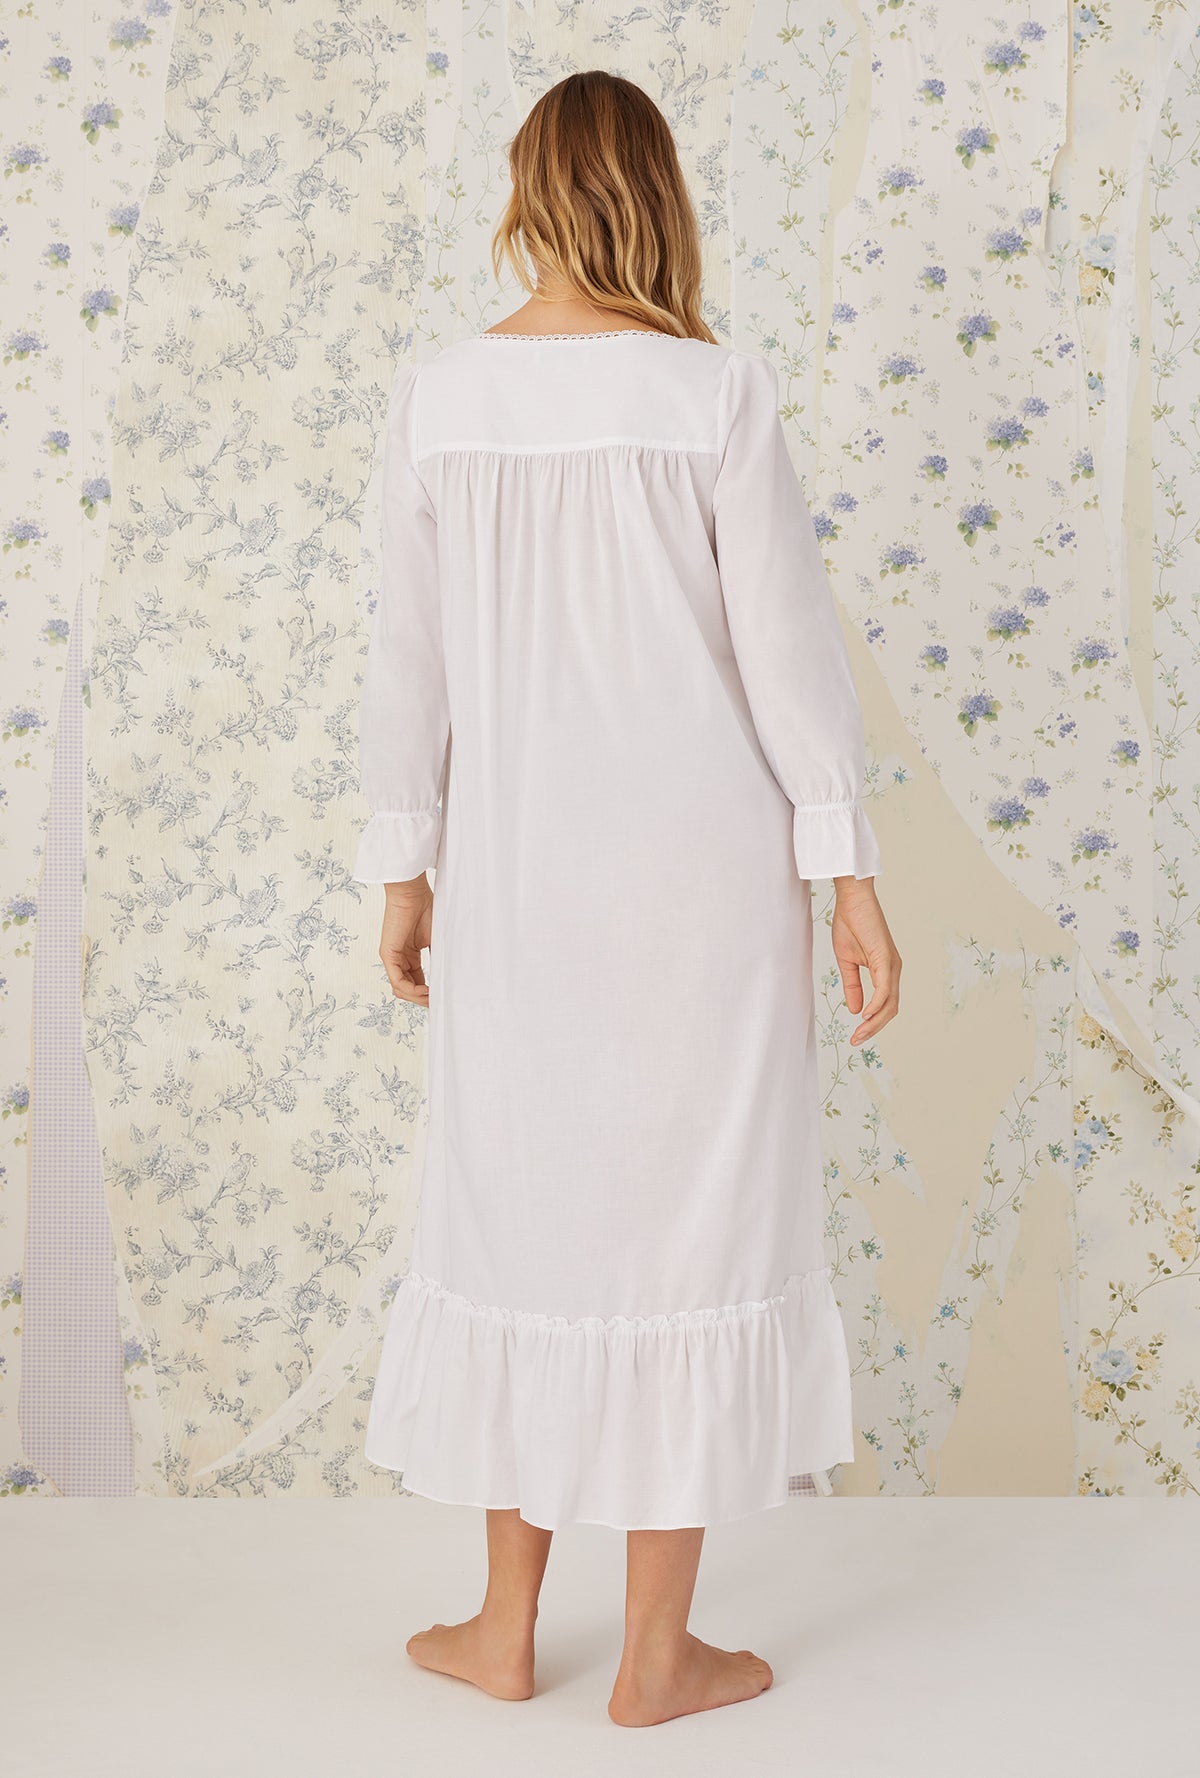 Comfortable white nightgown In Various Designs 